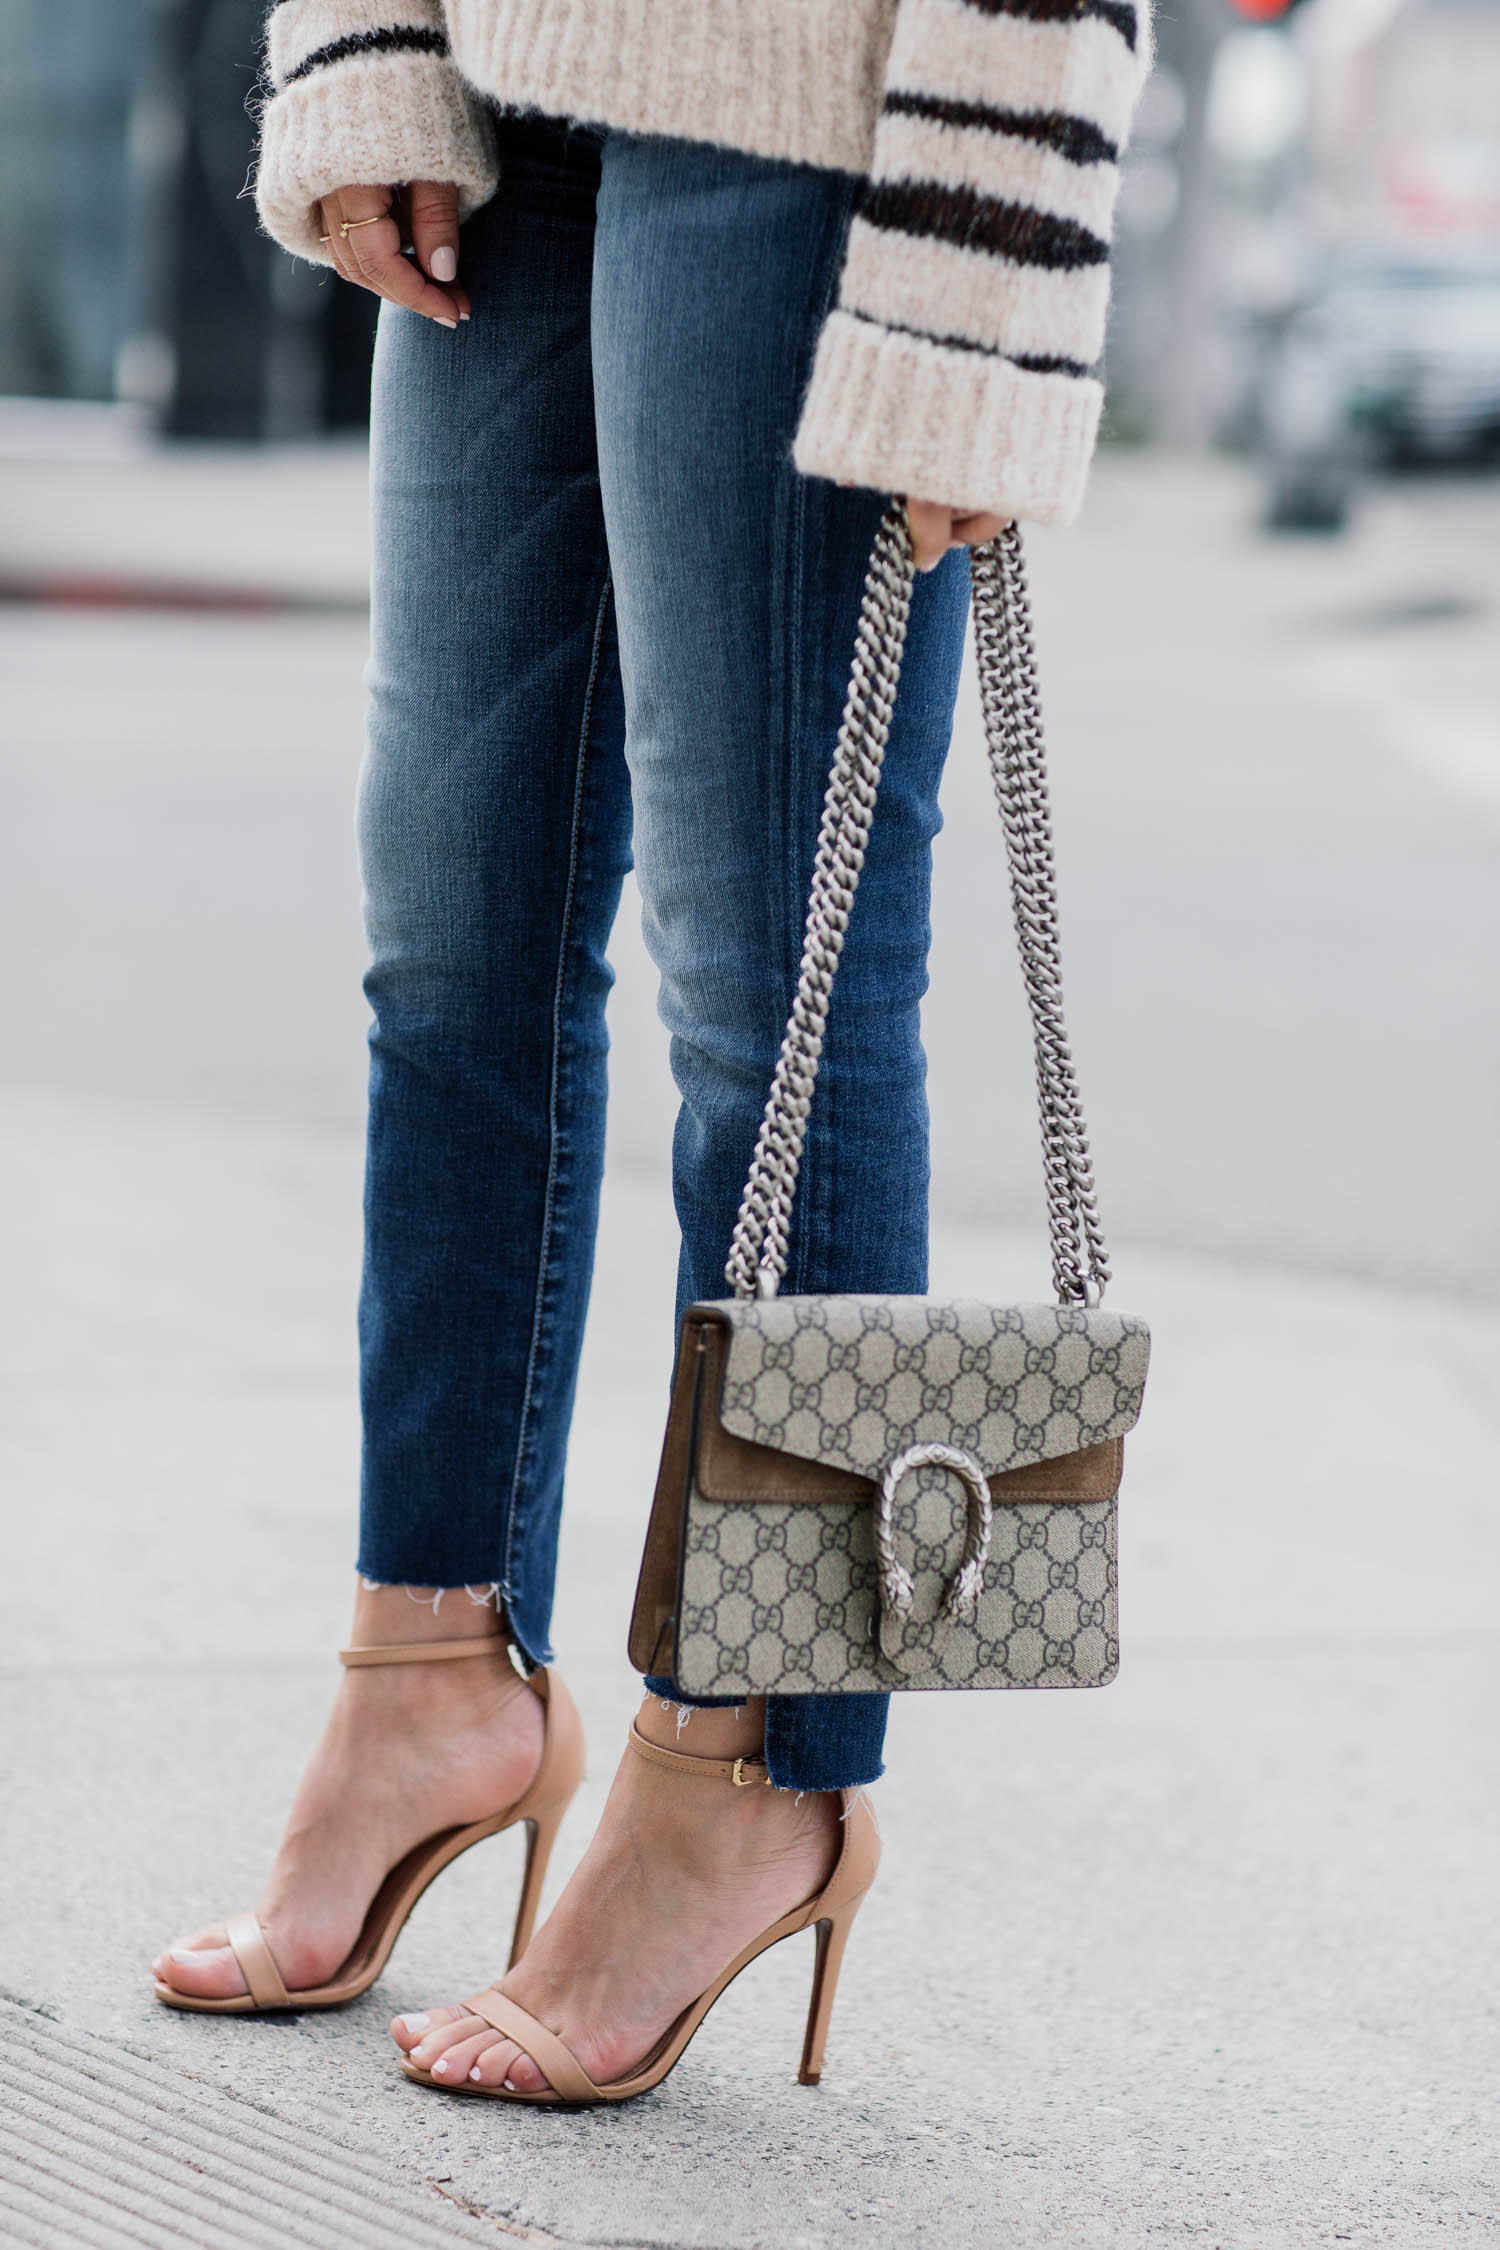 Blogger Sara Azani of Style MBA wearing Zadig and Voltaire white and black knit sweater, 7 For All Mankind crop skinny jeans, Steve Madden Stecy nude high-heeled sandal, Le Specs sunglasses, and a Gucci bag.